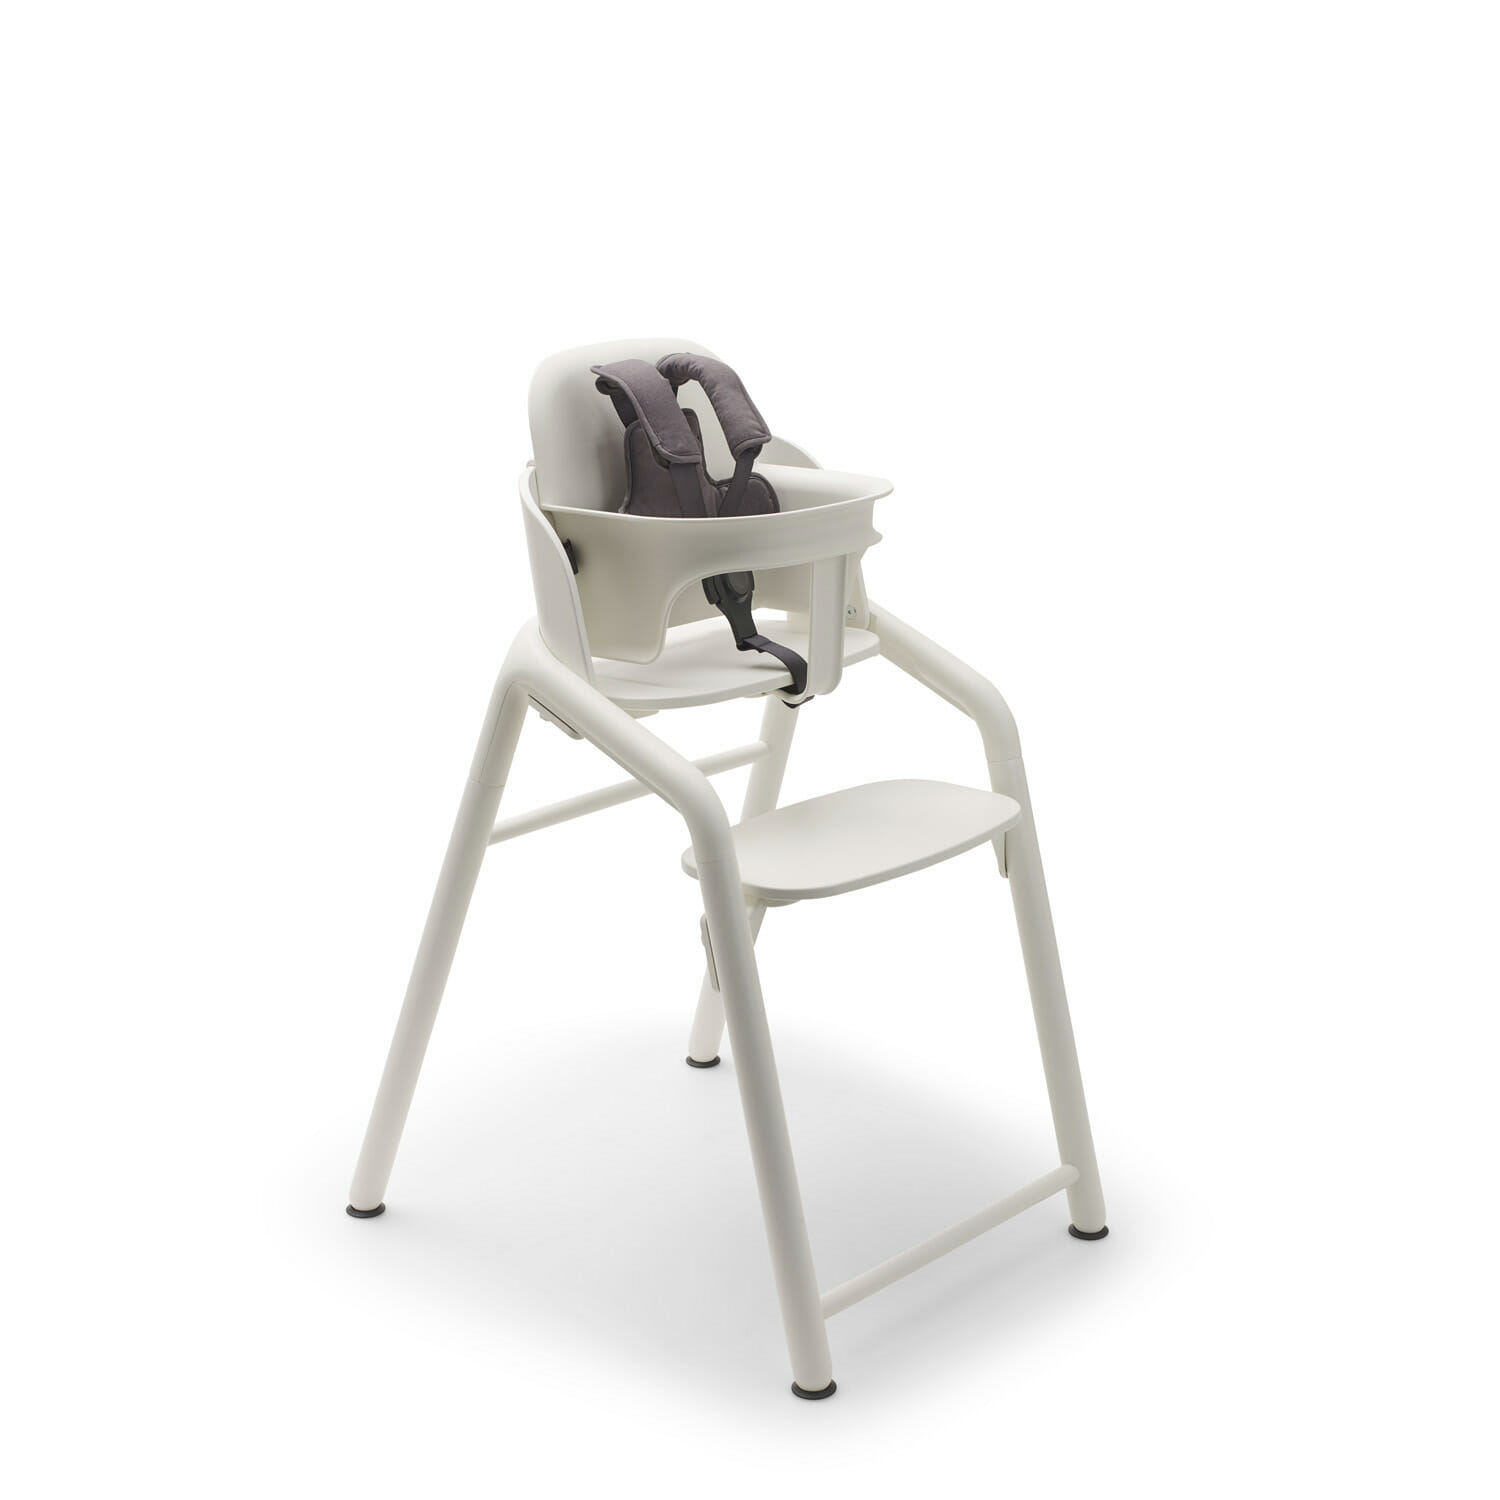 Bugaboo Giraffe Baby Set WHITE - CHAIR NOT INCLUDED